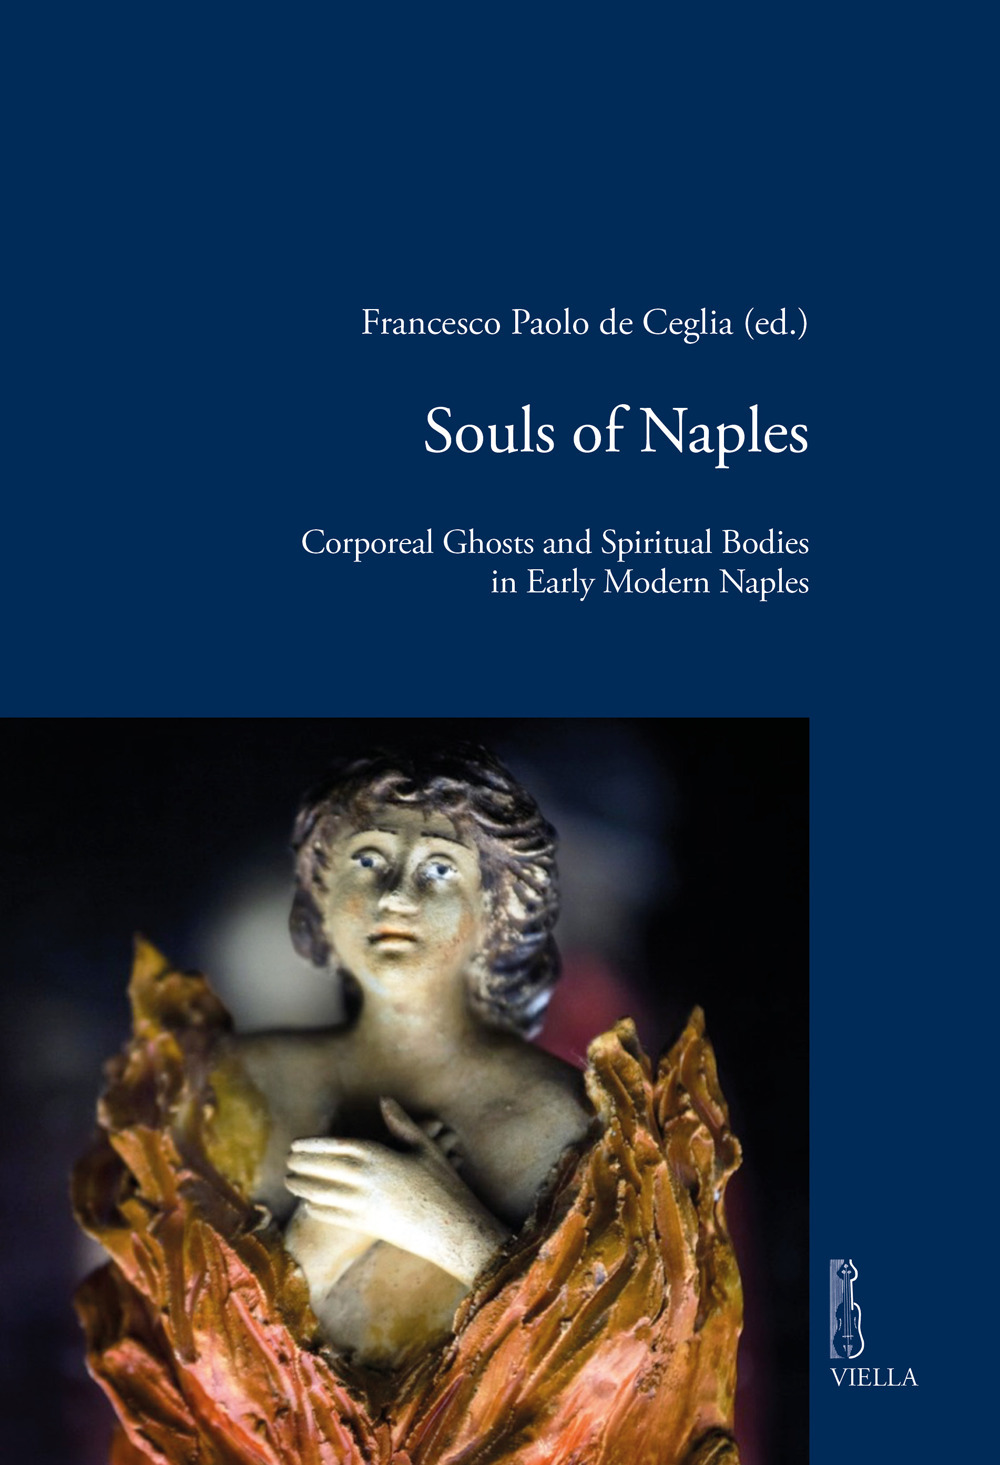 Souls of Naples. Corporeal ghosts and spiritual bodies in early modern Naples